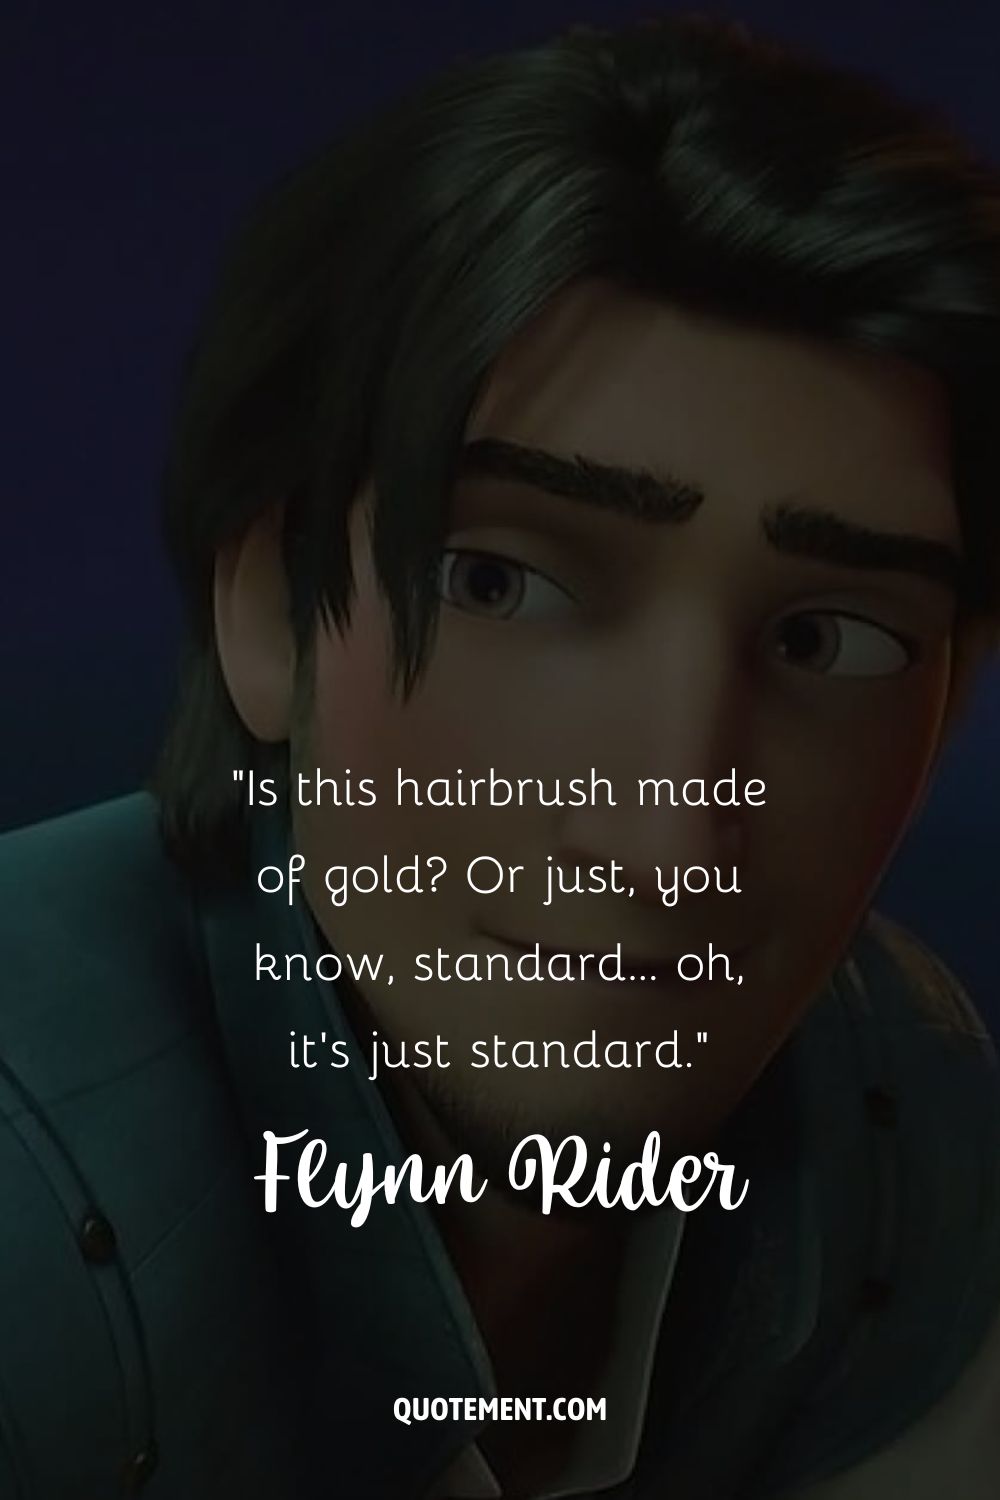 a male prince from tangled the movie representing quote from flynn rider